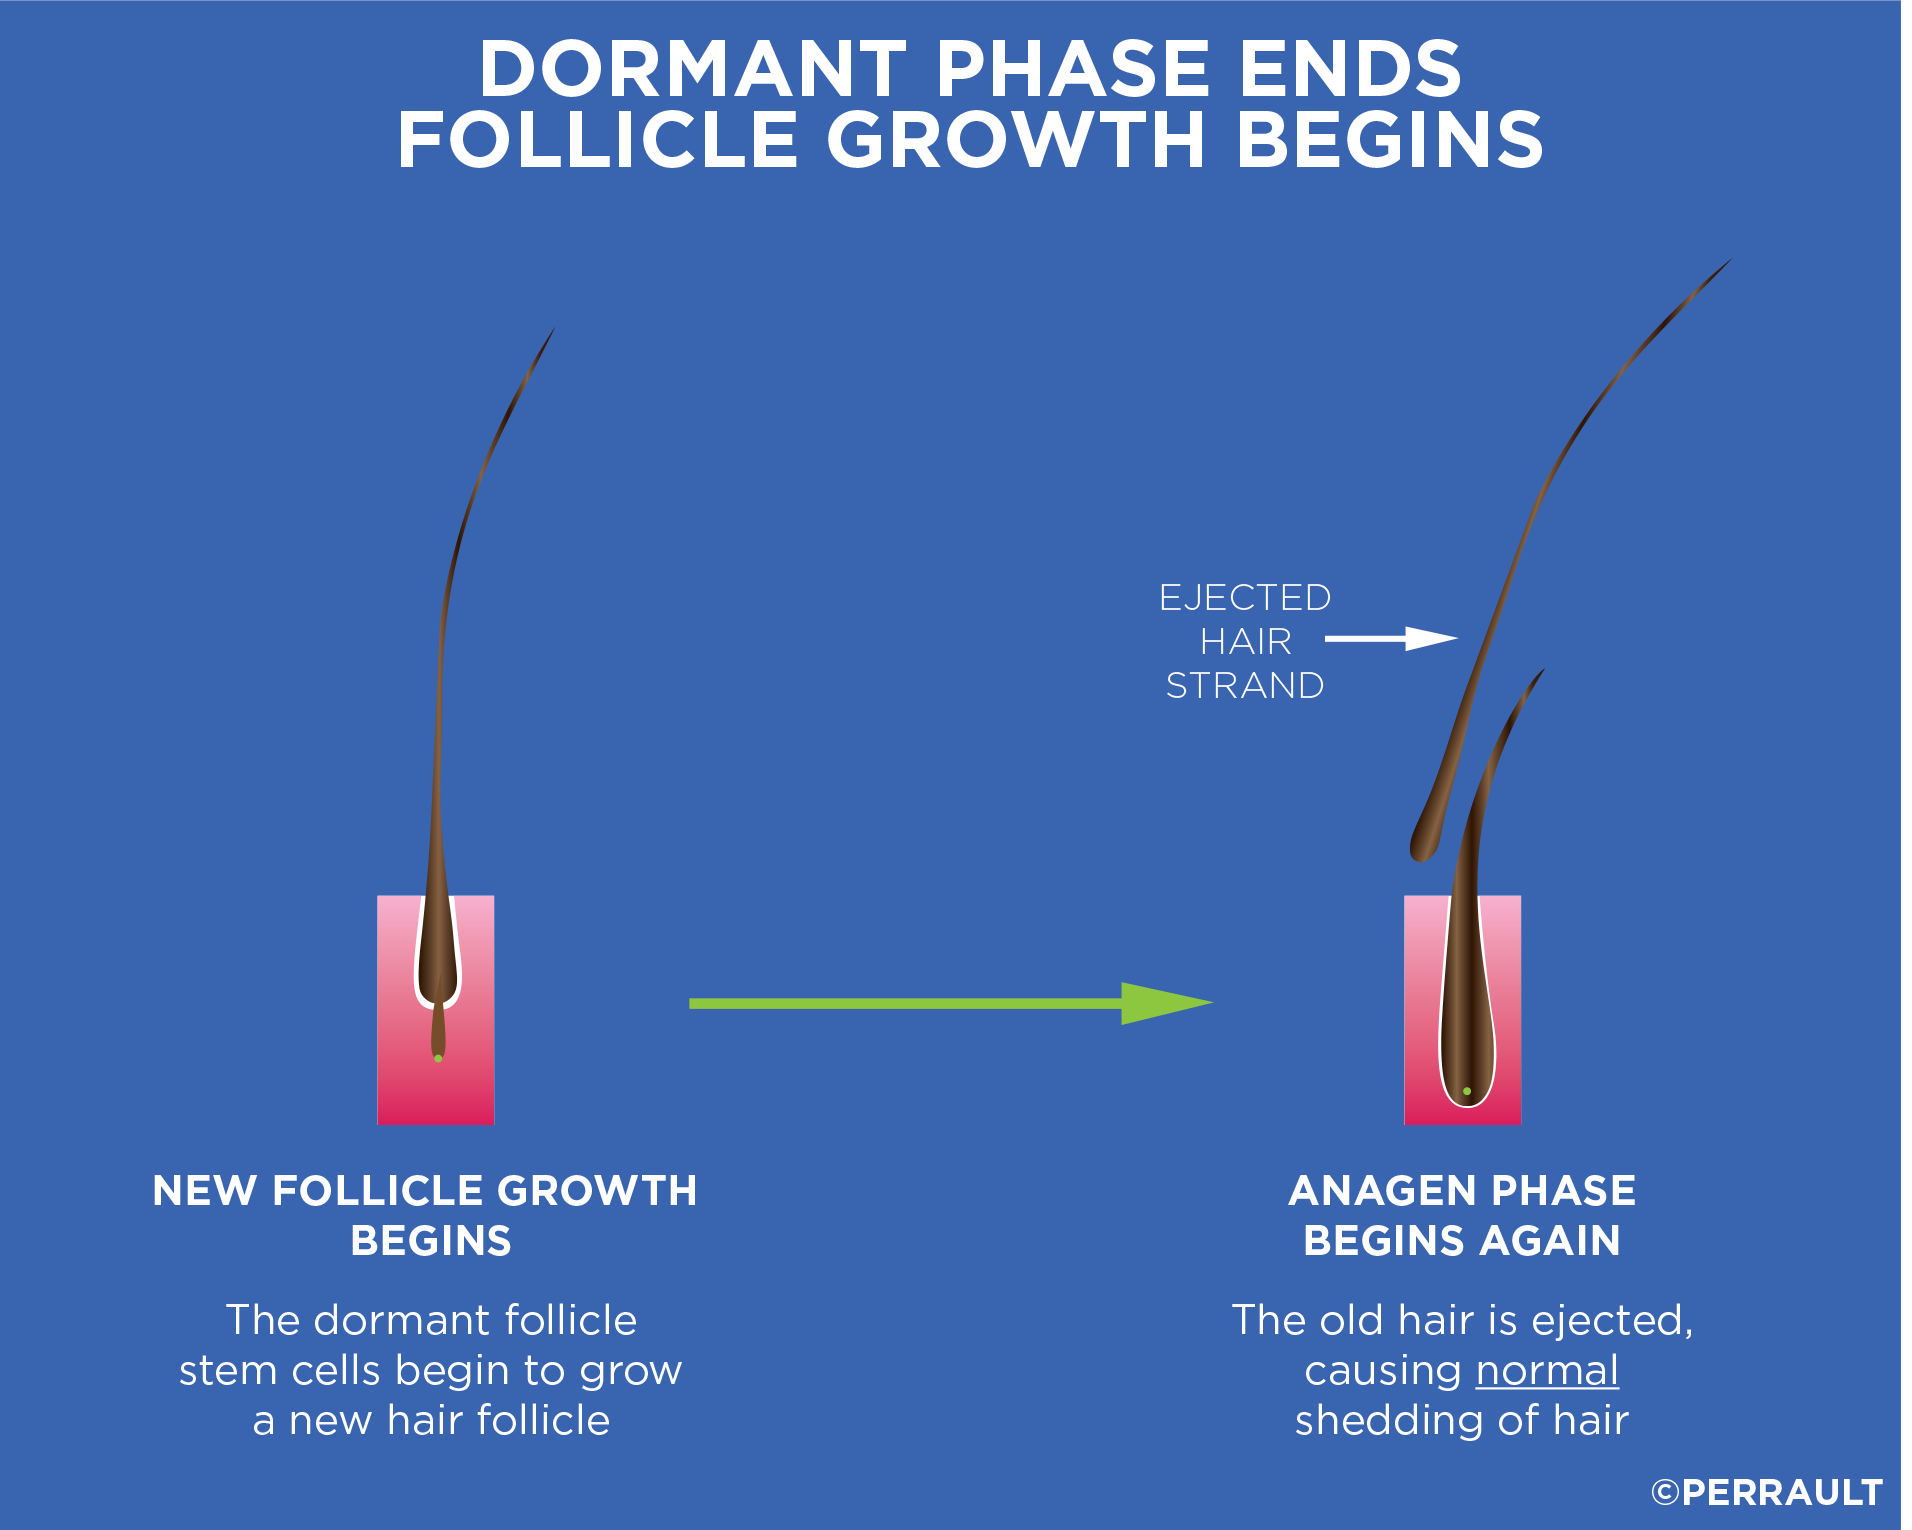 Dormant Phase Ends Follicle Growth Begins